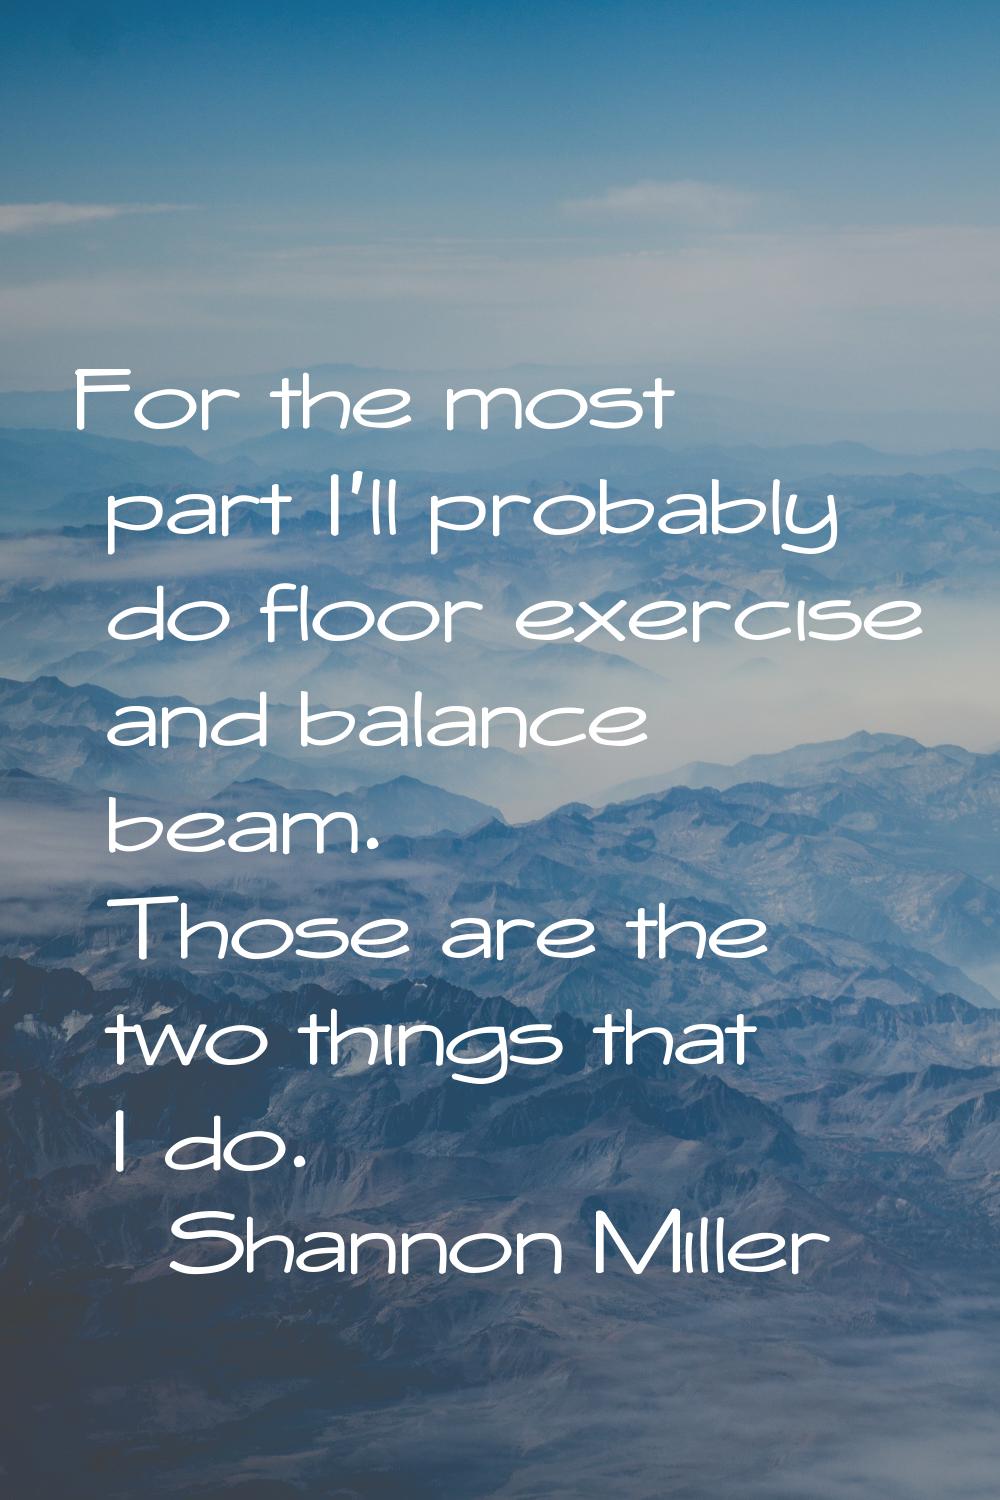 For the most part I'll probably do floor exercise and balance beam. Those are the two things that I